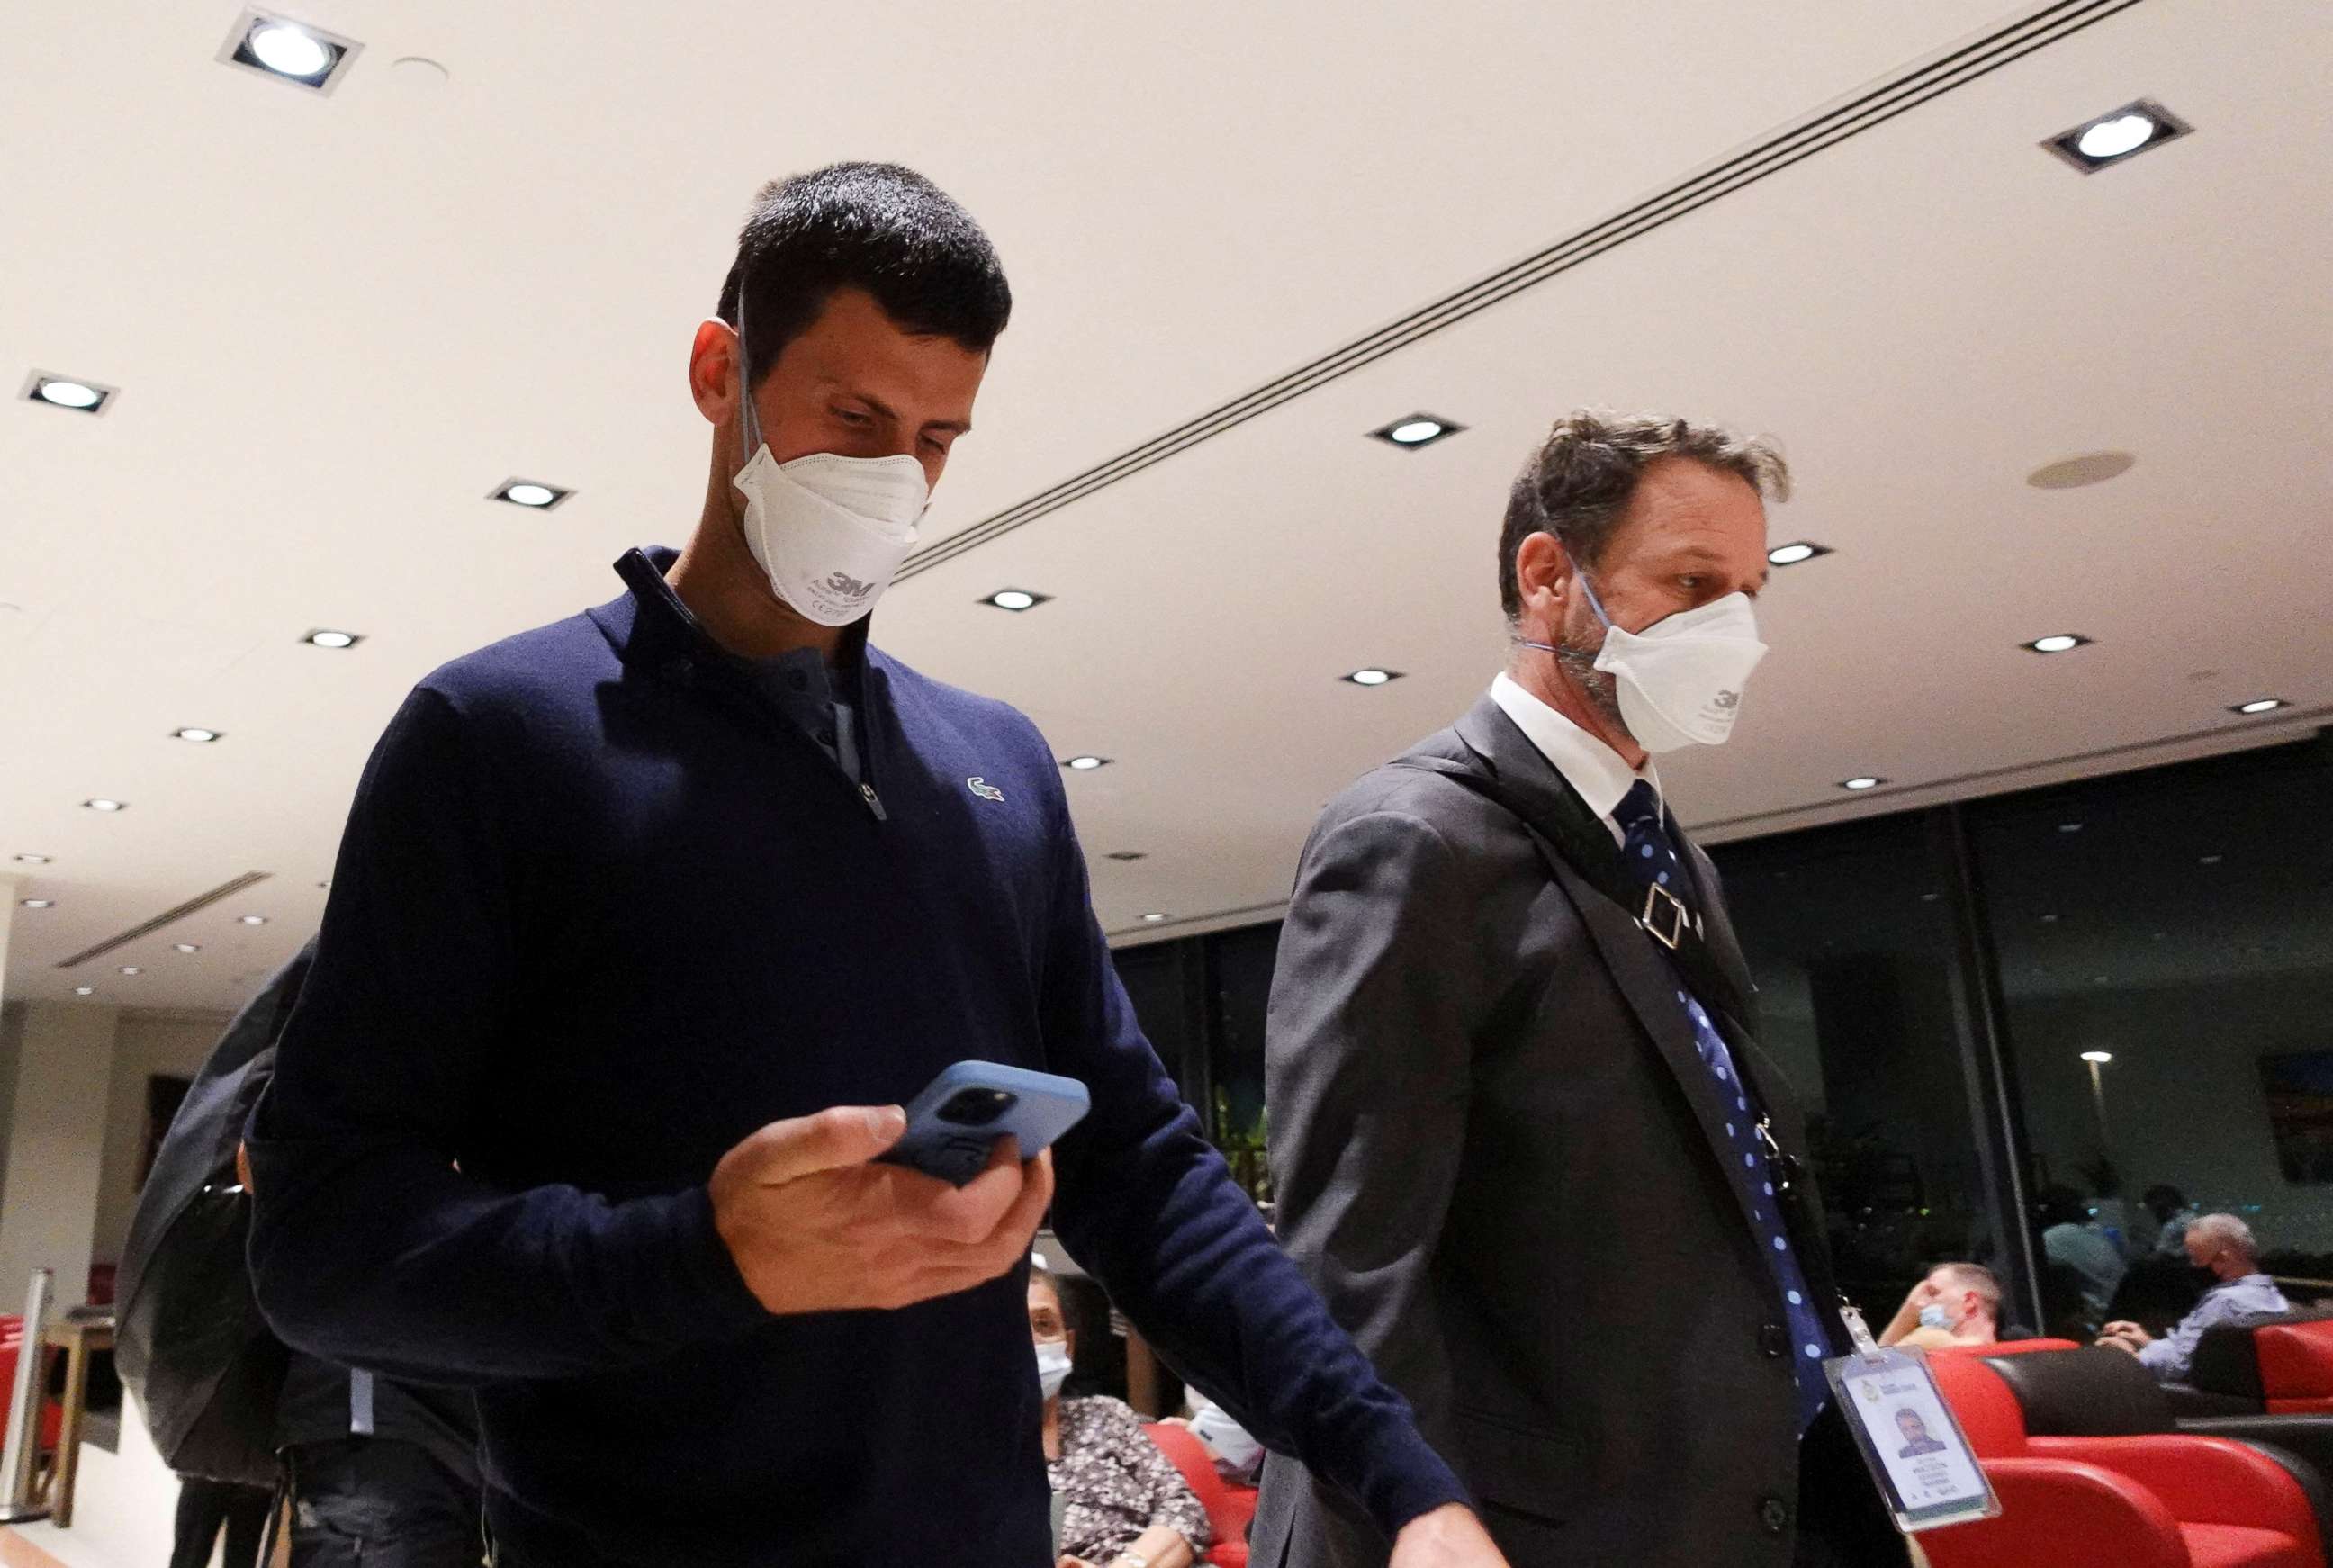 PHOTO: Serbian tennis player Novak Djokovic walks in Melbourne Airport before boarding a flight, after the Federal Court upheld a government decision to cancel his visa to play in the Australian Open, in Melbourne, Australia, Jan. 16, 2022.